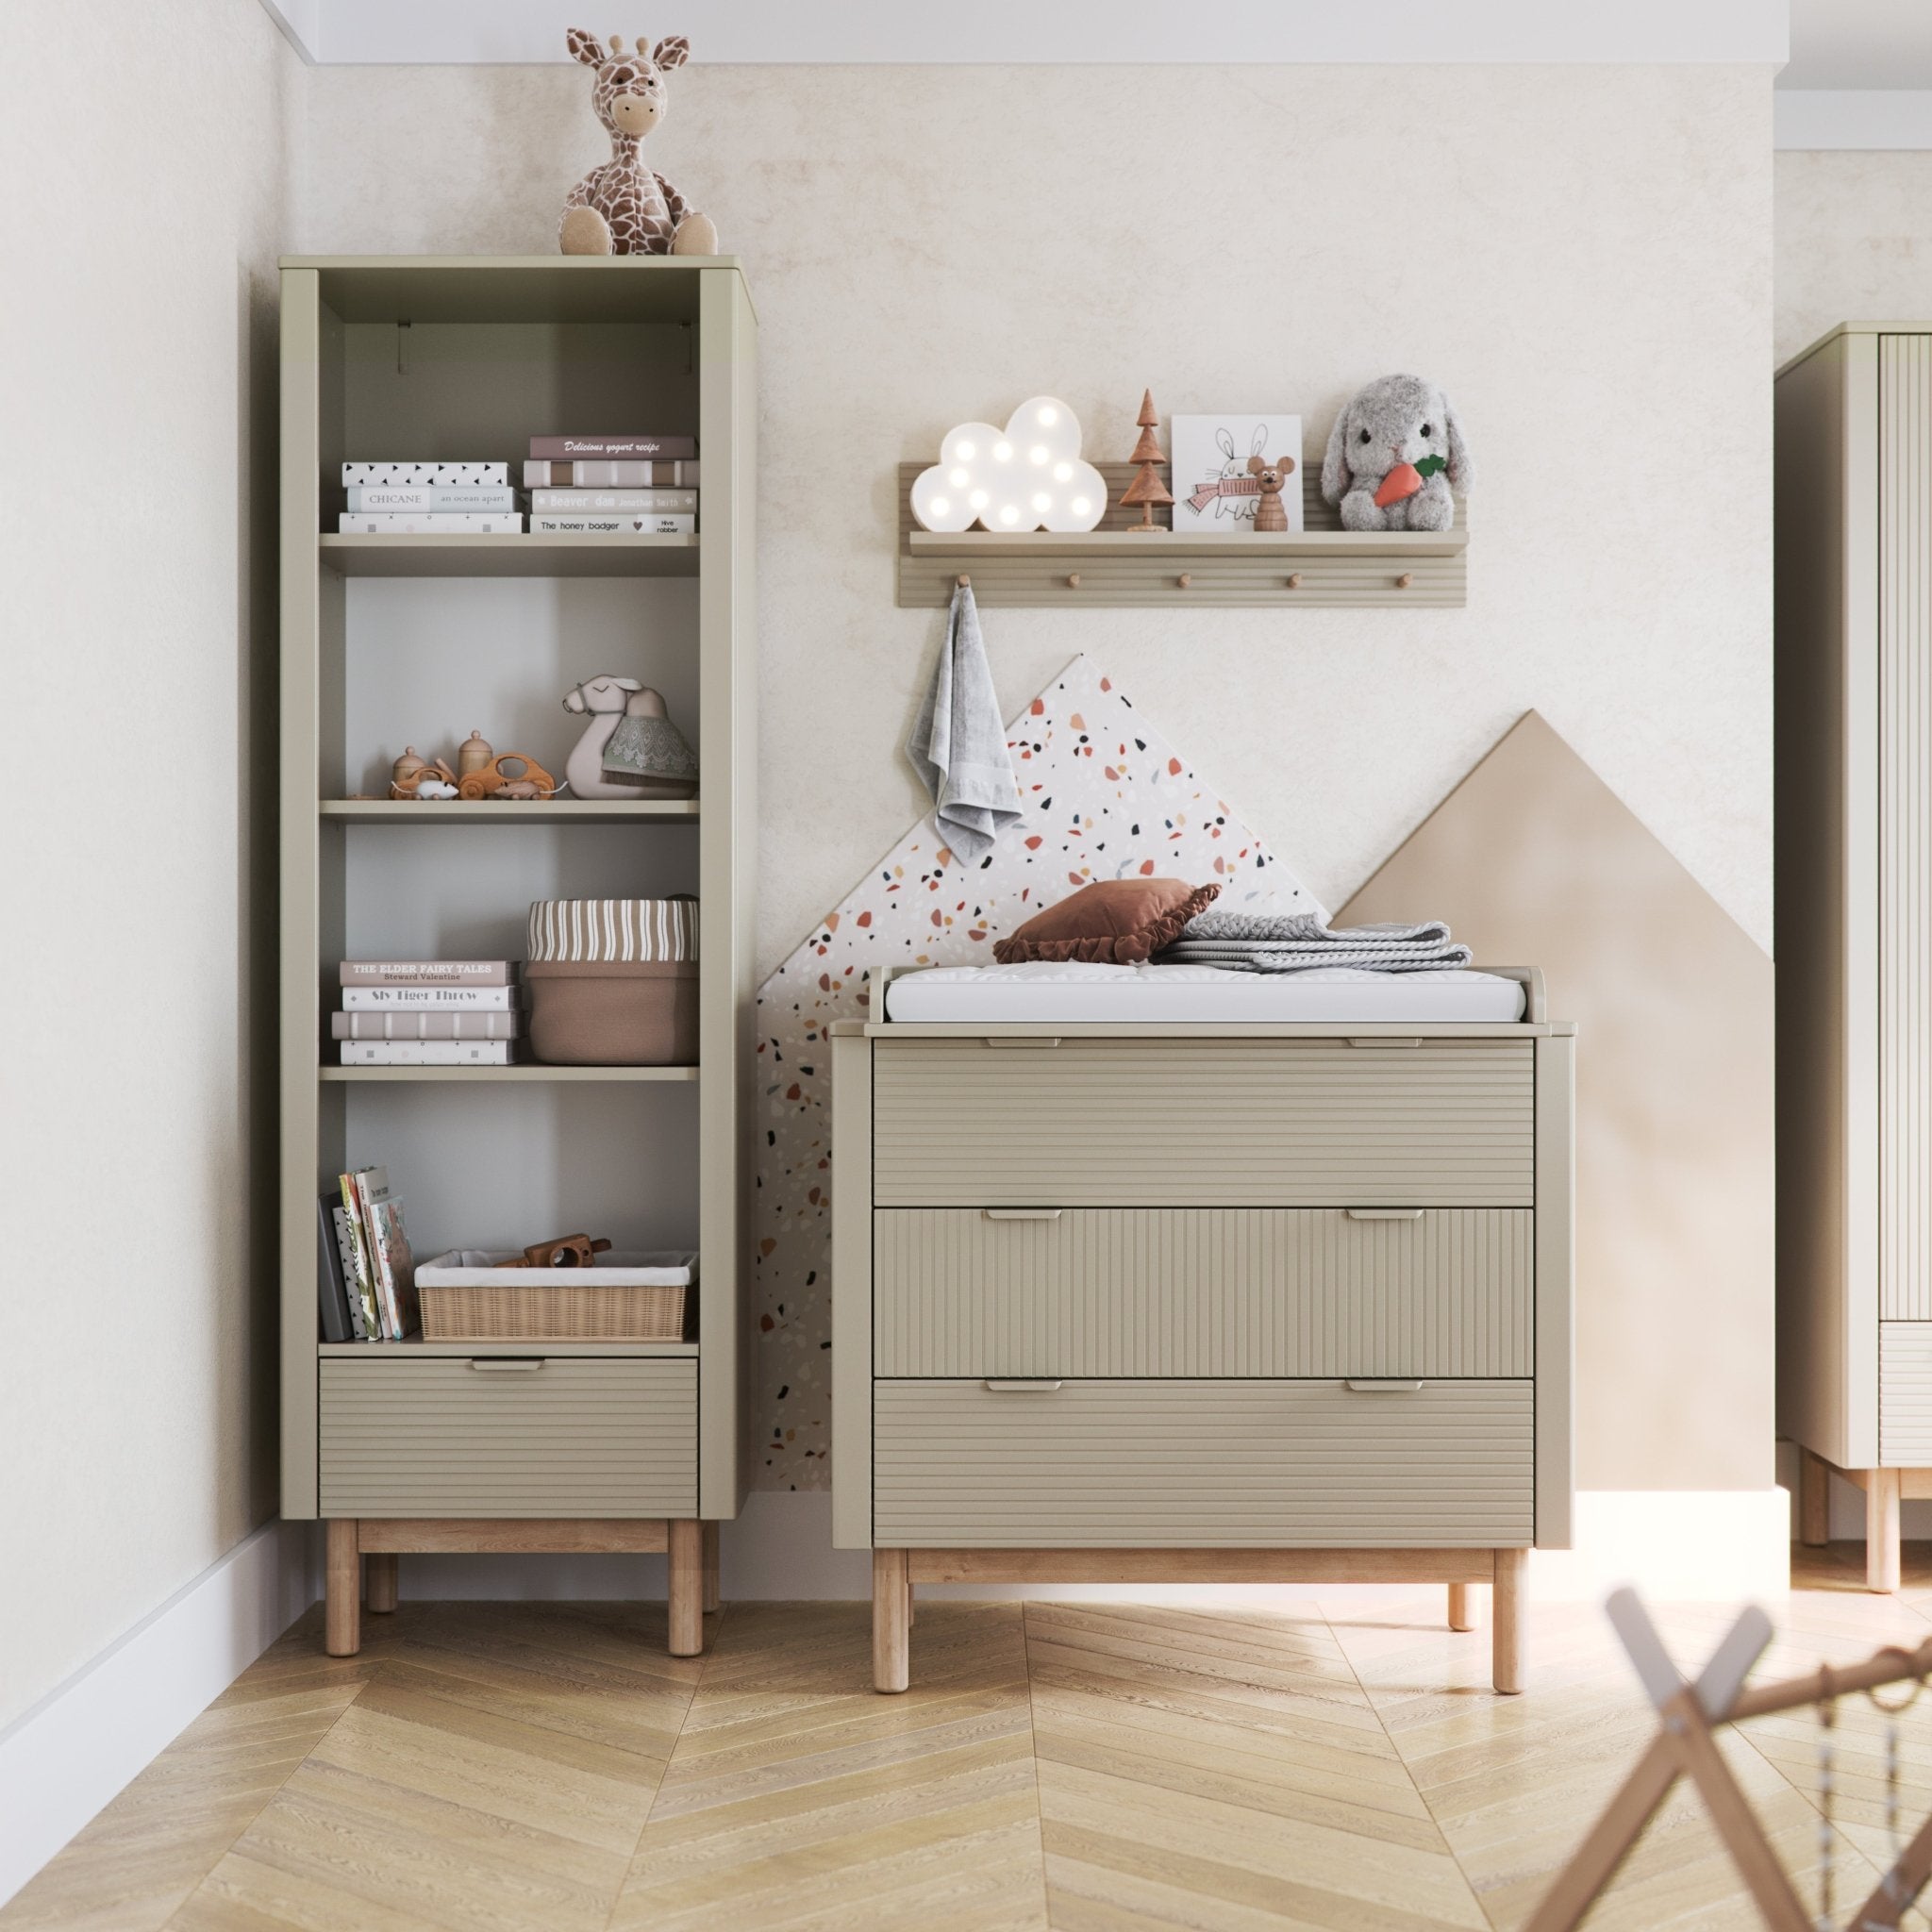 Maja changing unit Champagne color - Scandinavian Stories by Marton